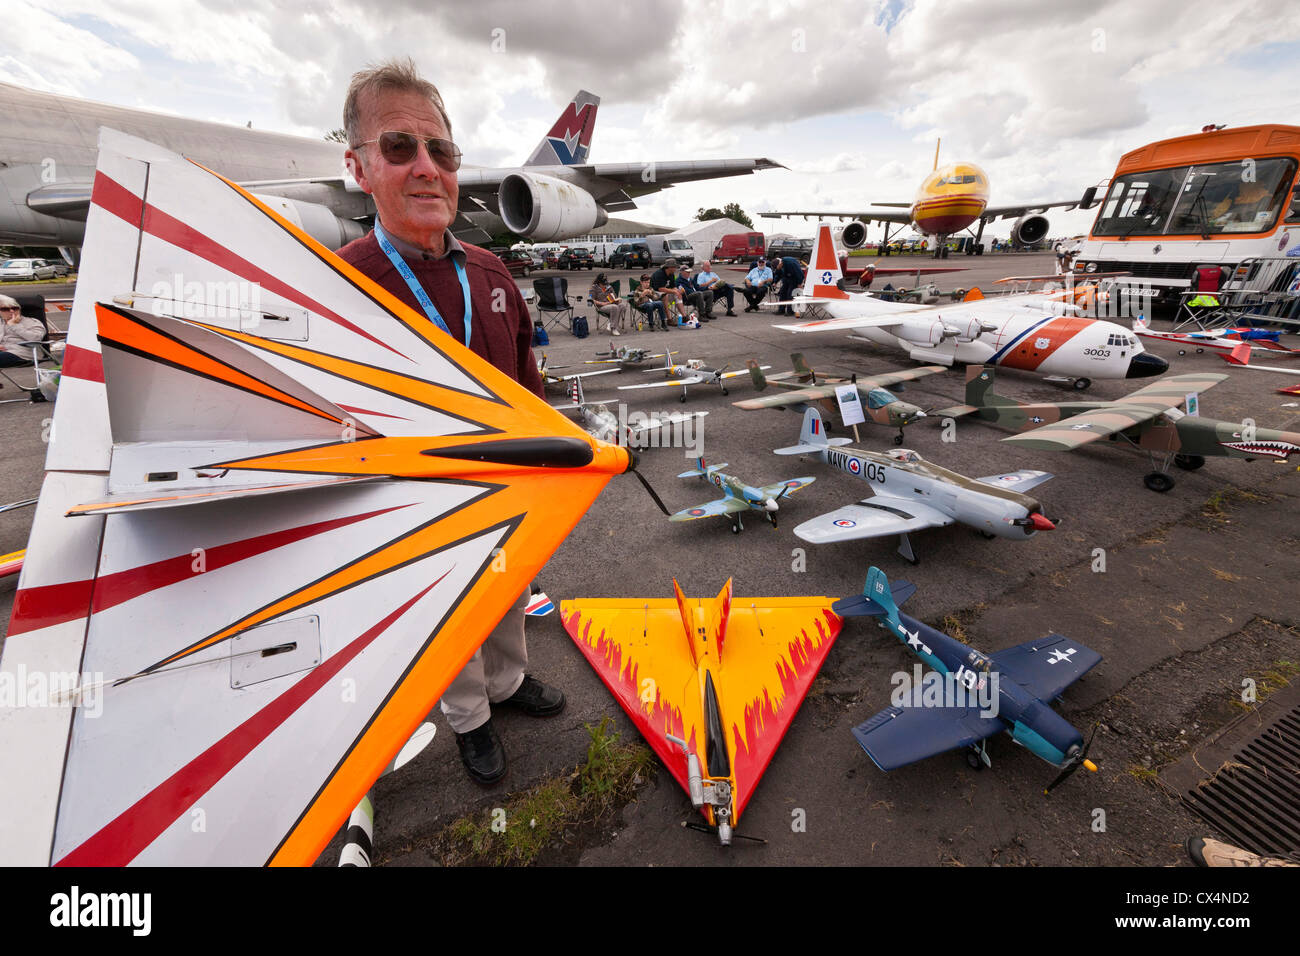 Colin Matthews with his model of a Rapier aircraft in hand at the Best of British Show, Cotswold (Kemble EGBP) Airport. JMH6082 Stock Photo